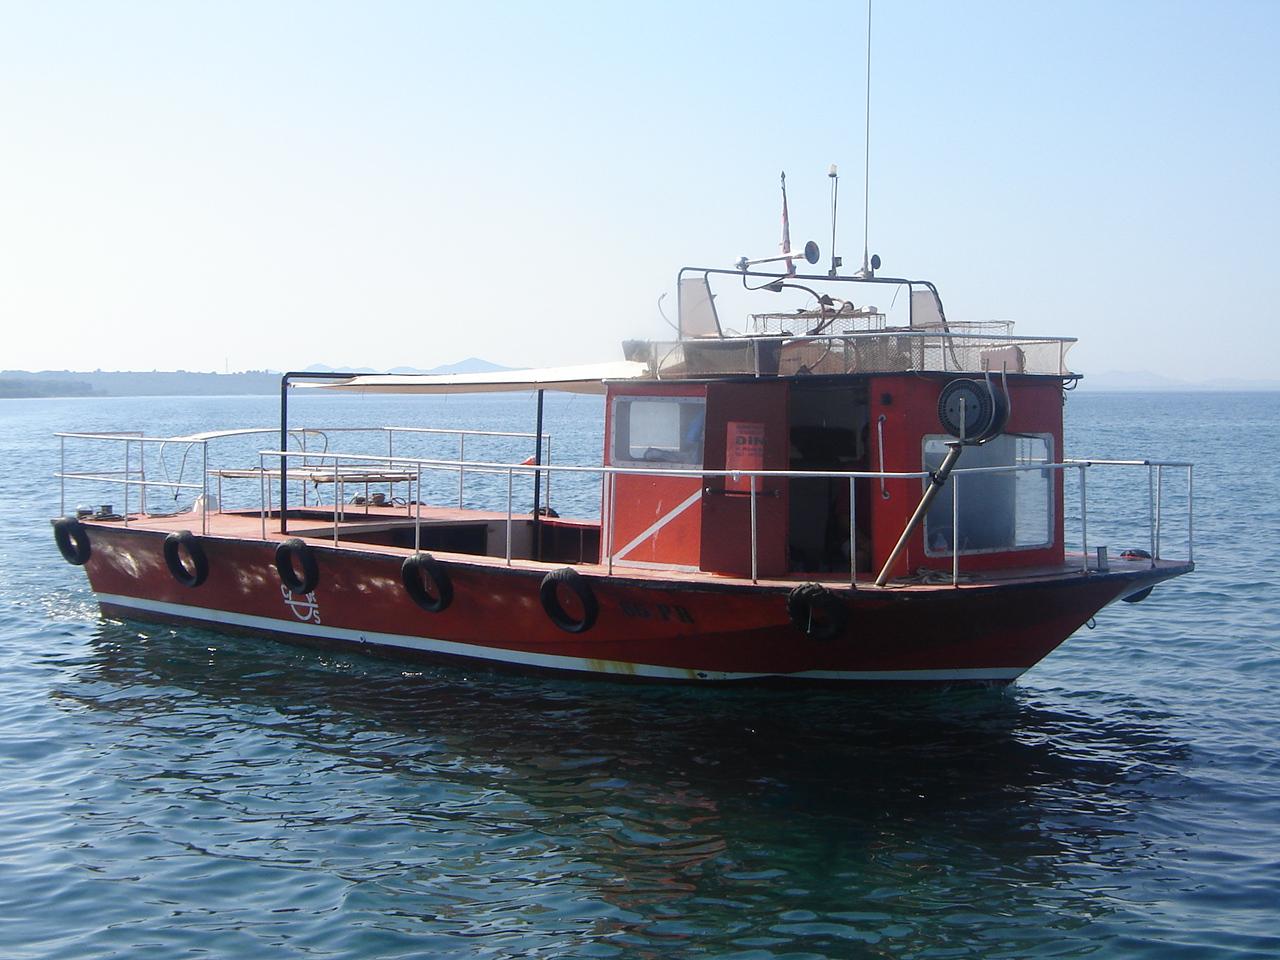 The workboats used during the field school